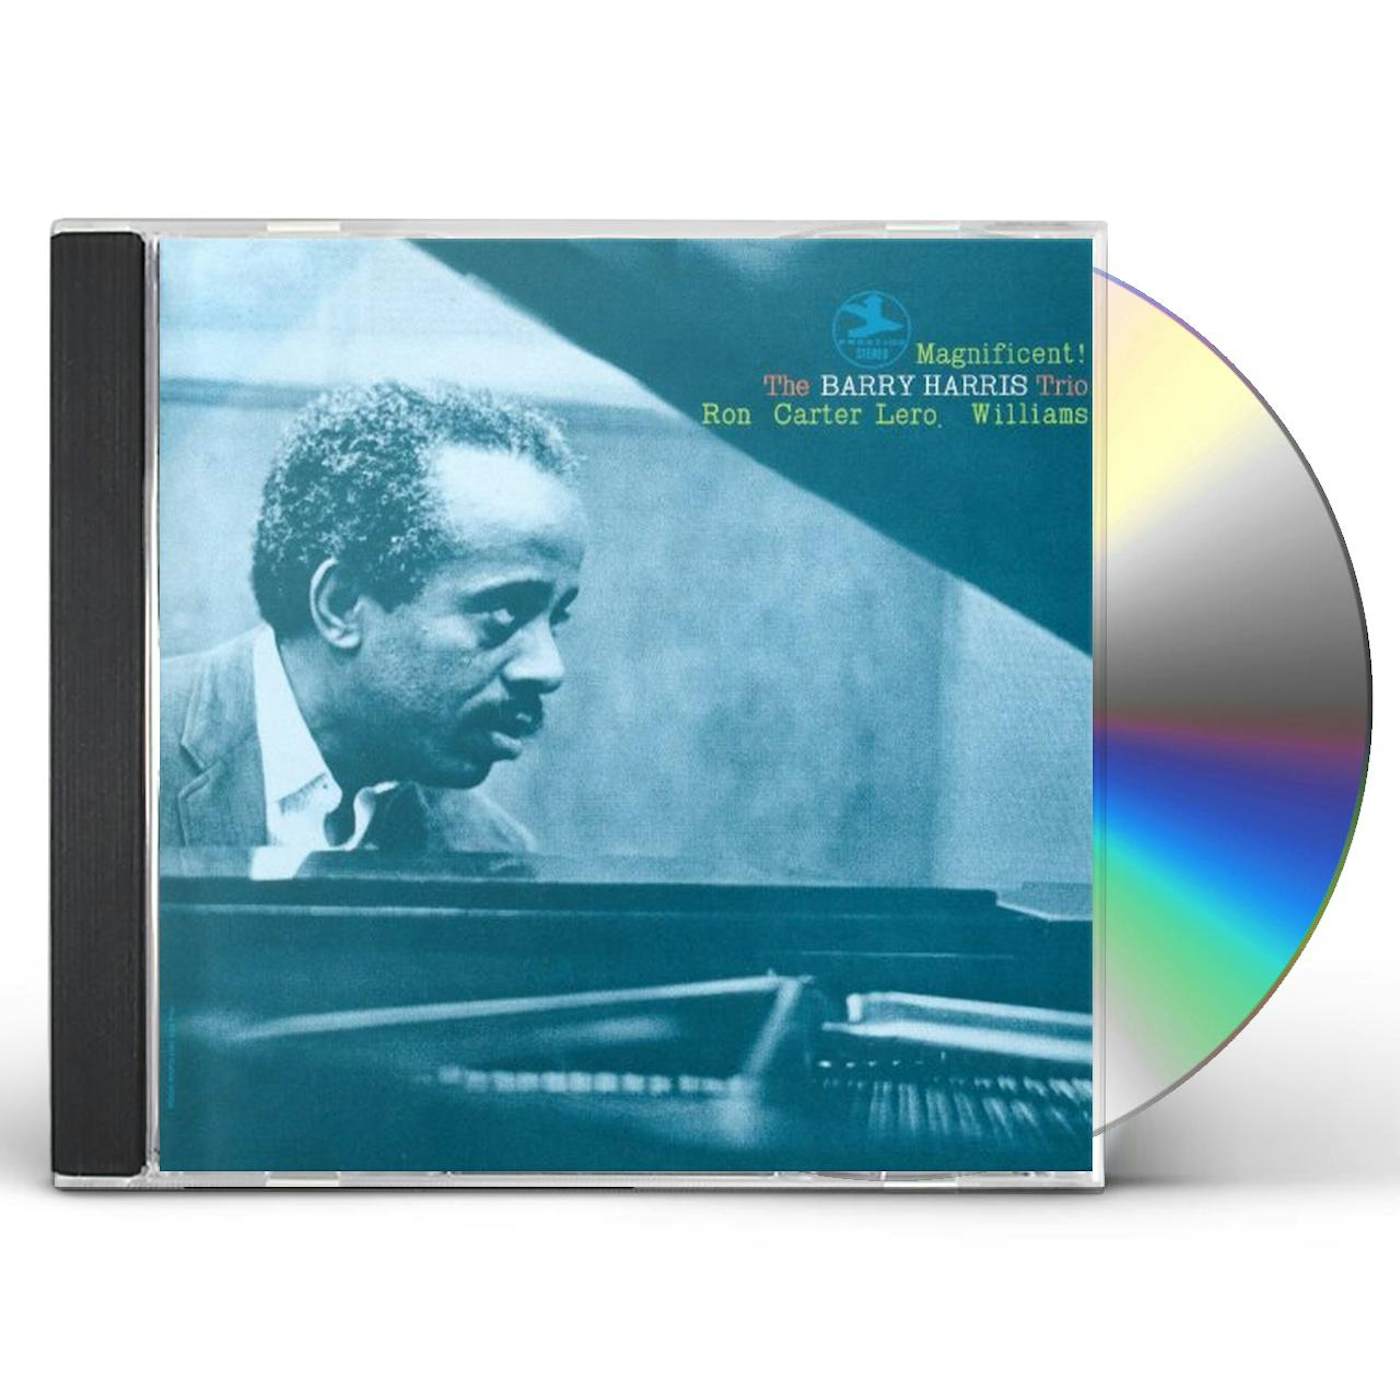 Barry Harris MAGNIFICENT! CD